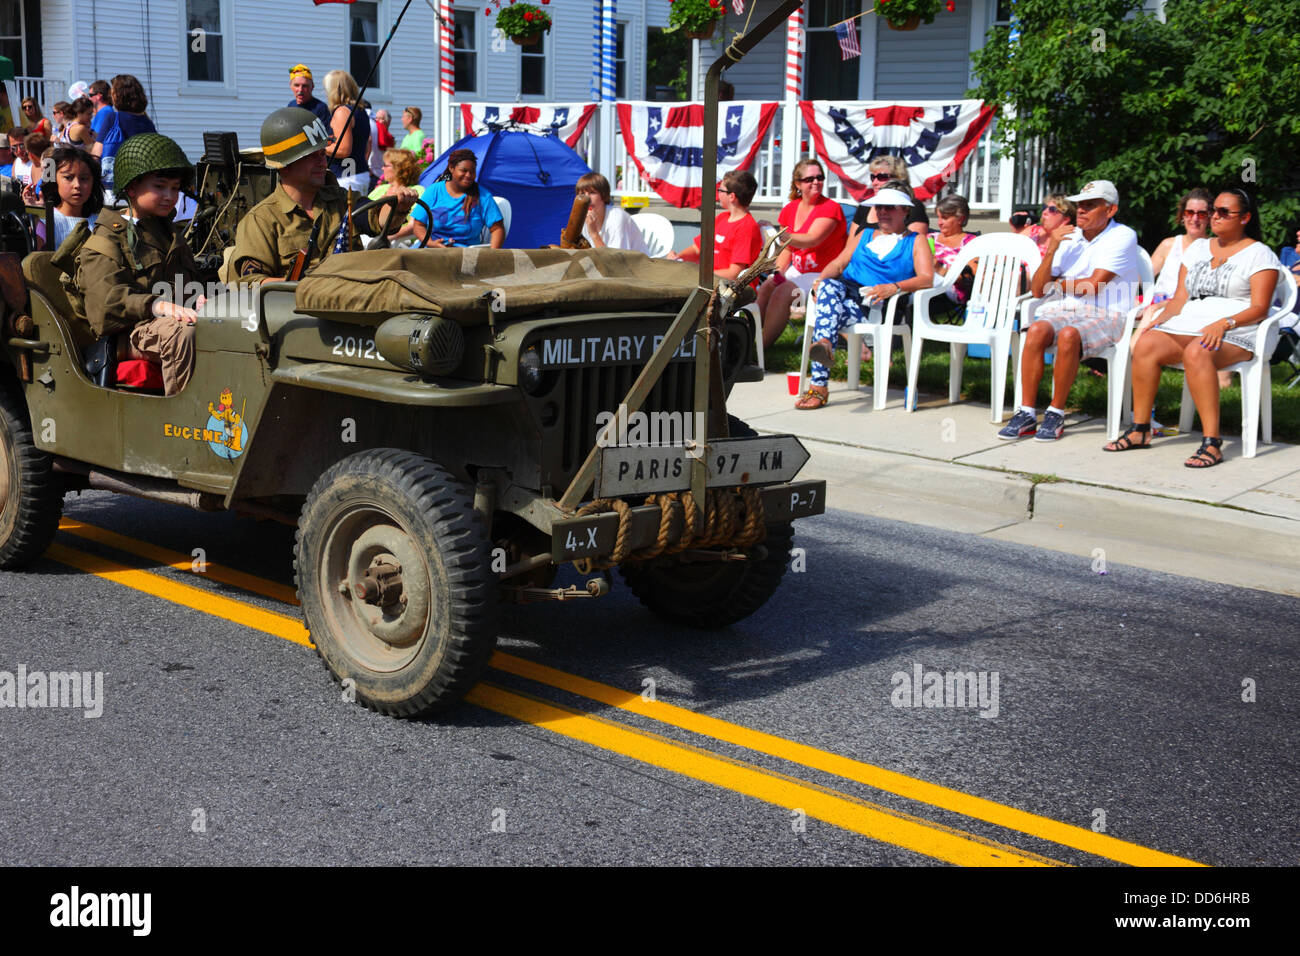 Soldier in military police jeep with Paris 97km sign on front, 4th of July Independence Day parades, Catonsville, Maryland, USA Stock Photo